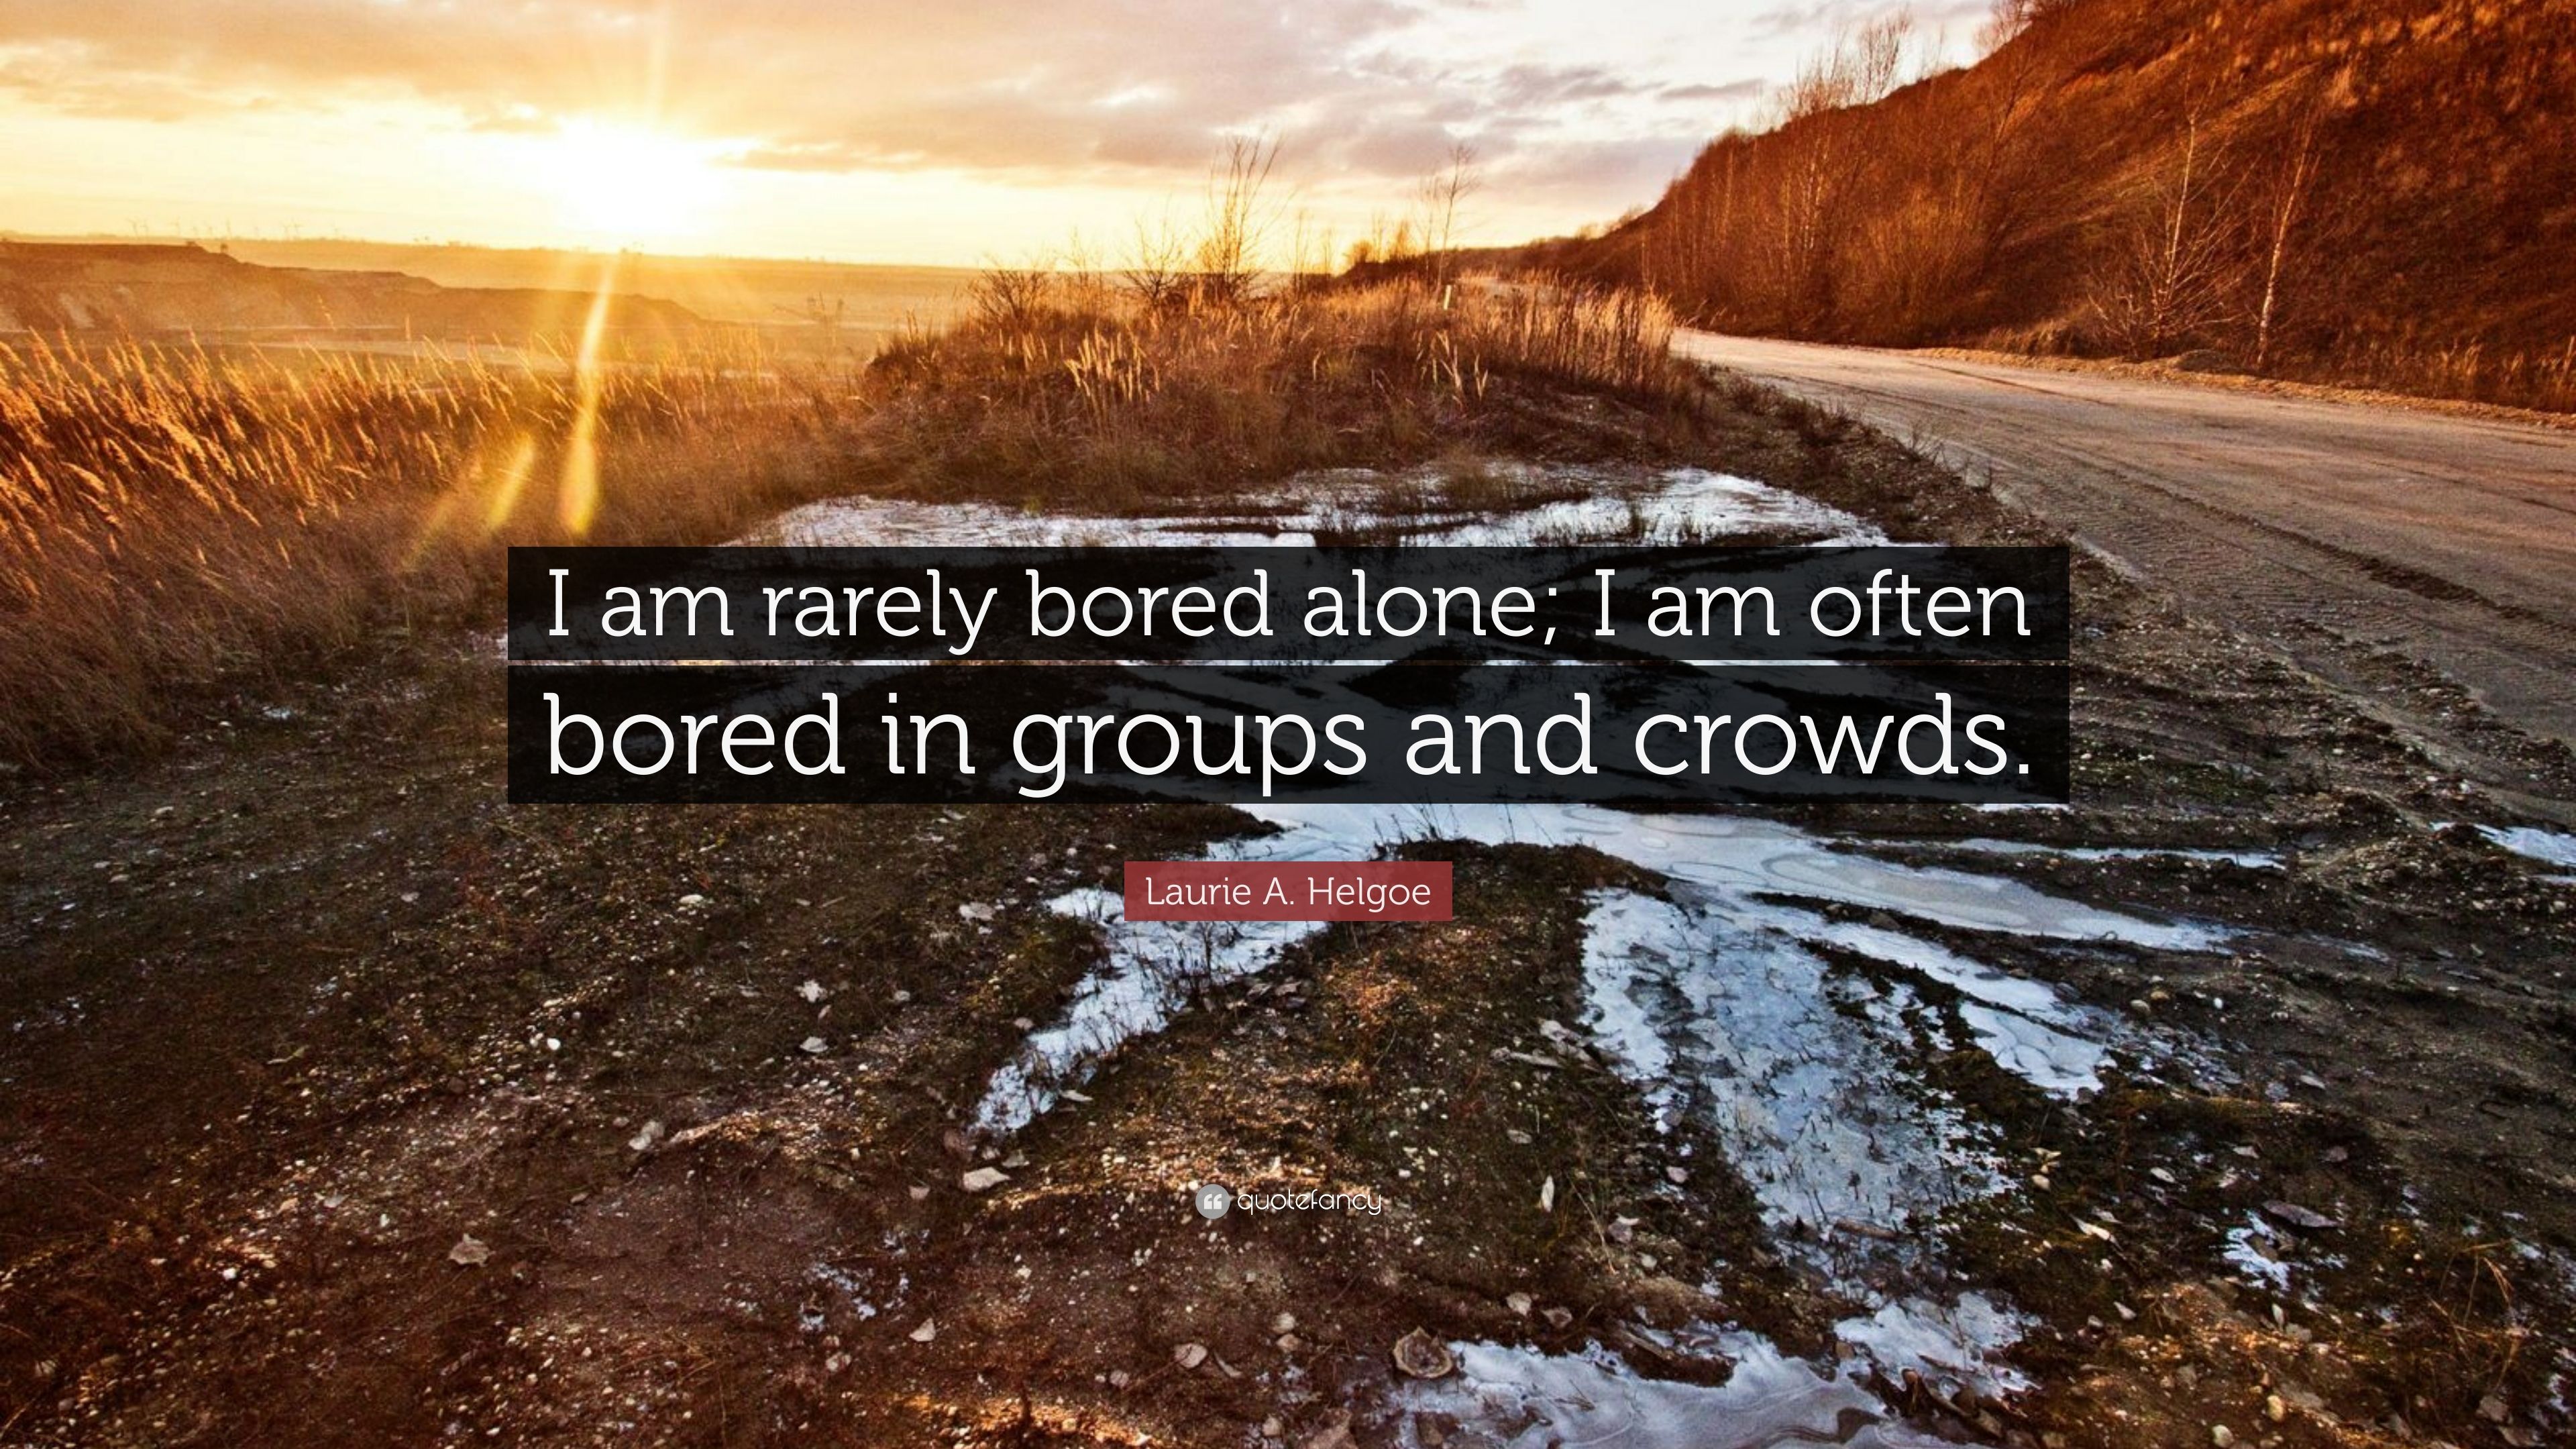 Laurie A. Helgoe Quote: “I am rarely bored alone; I am often bored